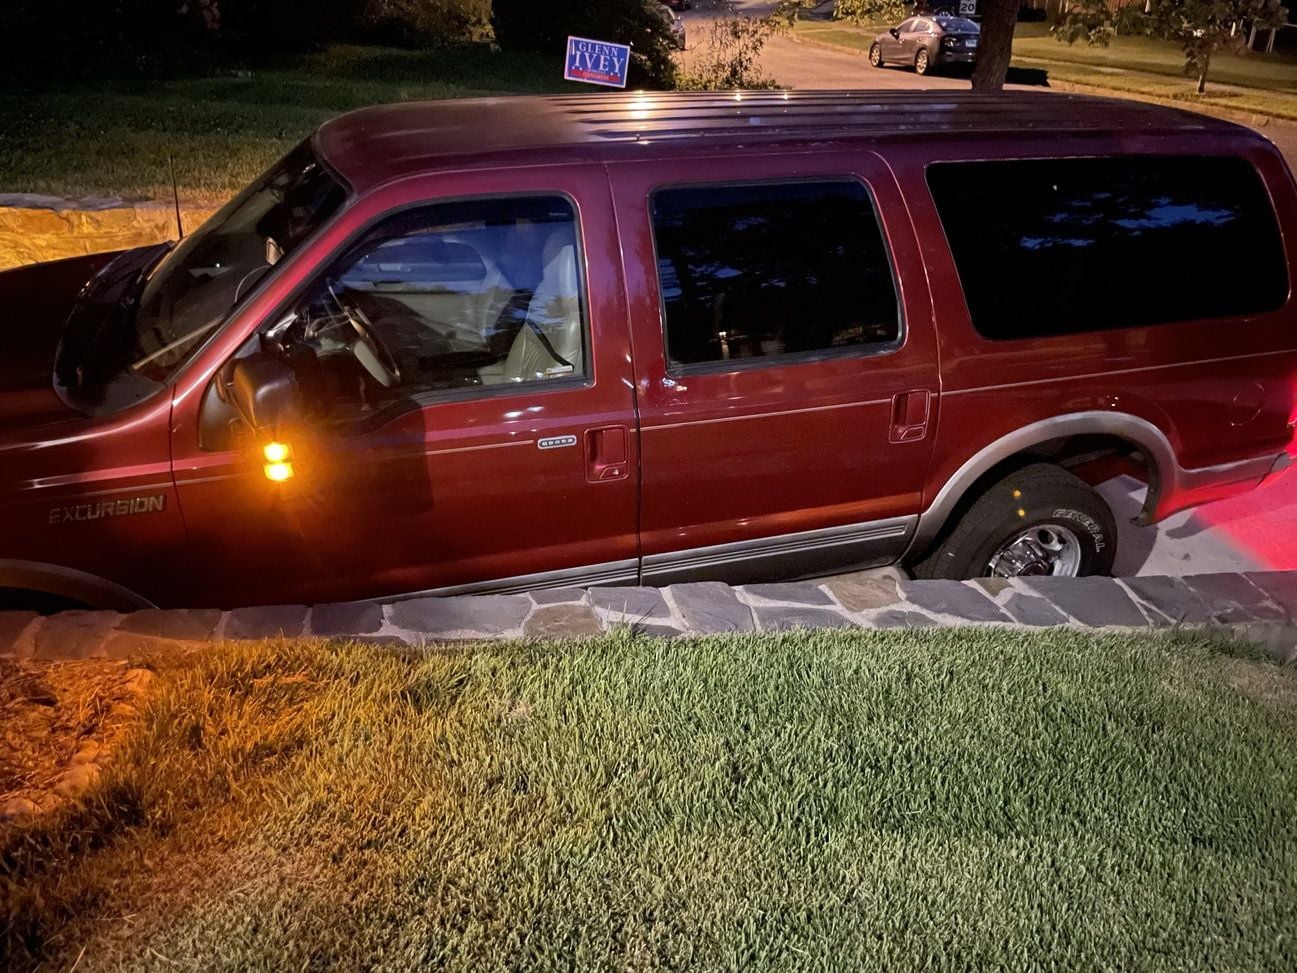 2000 Ford Excursion - 2000 Ford Excursion Limited, 7.3L, 4x4. - Used - VIN 1FMSU43F7YEE34771 - 8 cyl - 4WD - Automatic - SUV - Red - Cheverly, MD 20785, United States